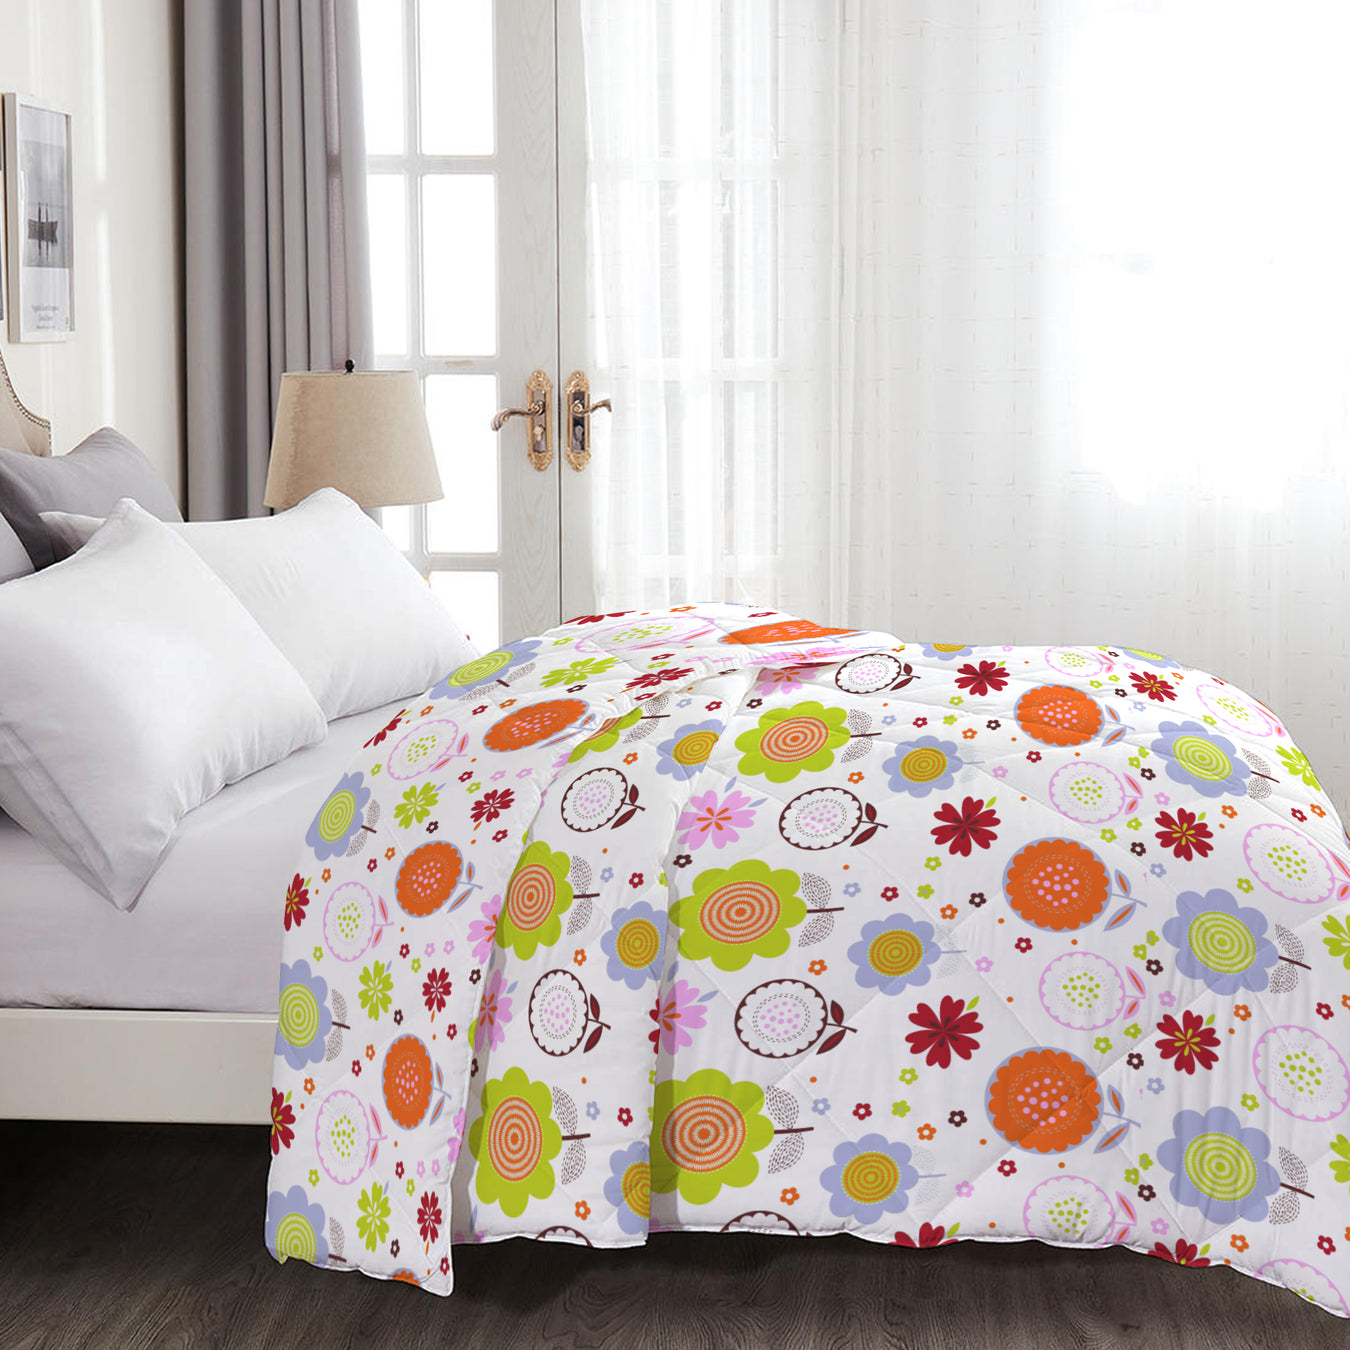 Printed Roll Comforters